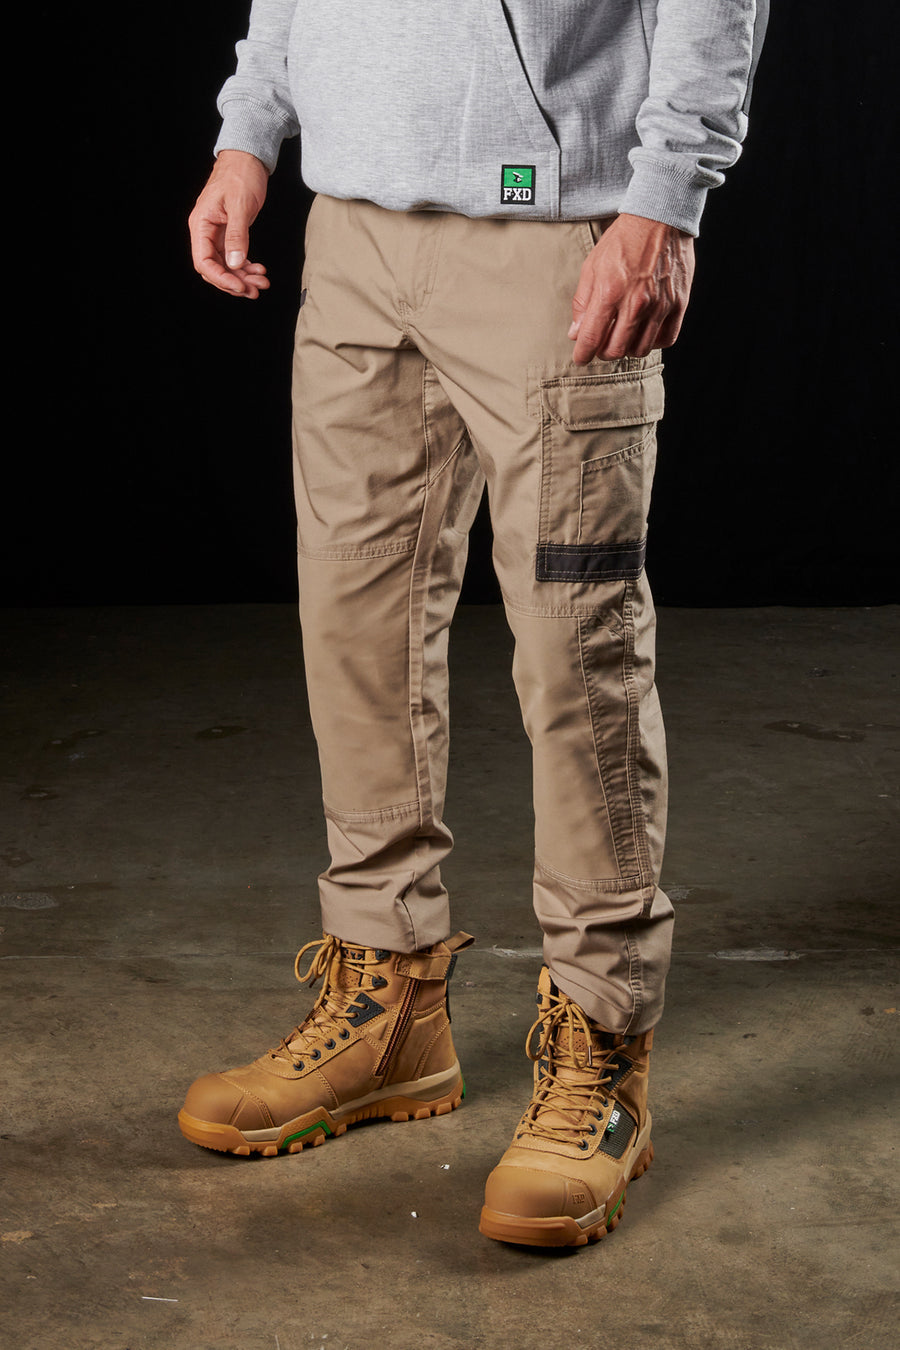 FXD Men's - WP 3 Work Pants - Stretchy